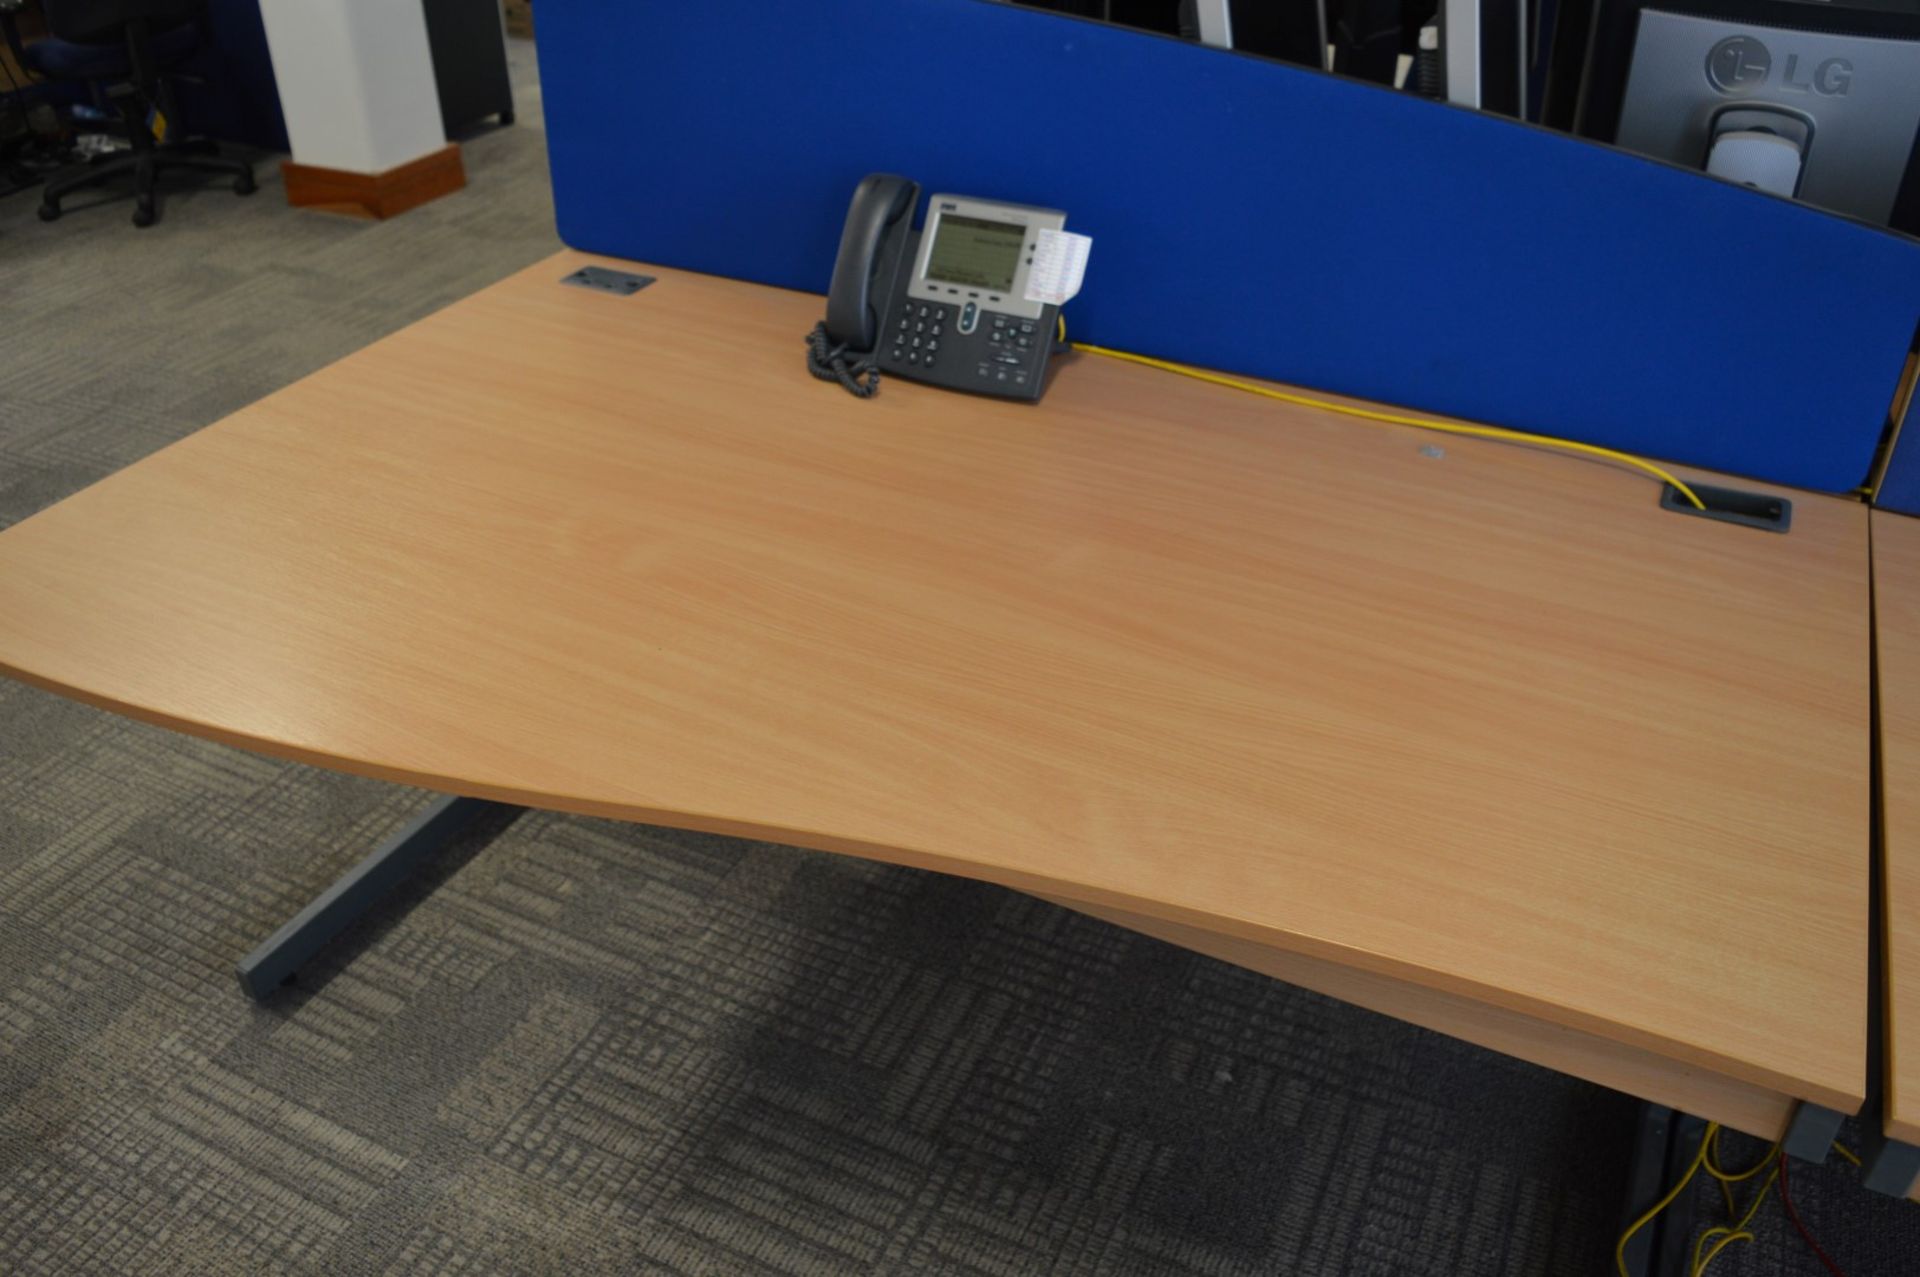 6 x Imperial Office Desks With Partition Dividers - Includes 3 Left Hand & 3 Right Hand Desks - - Image 5 of 10